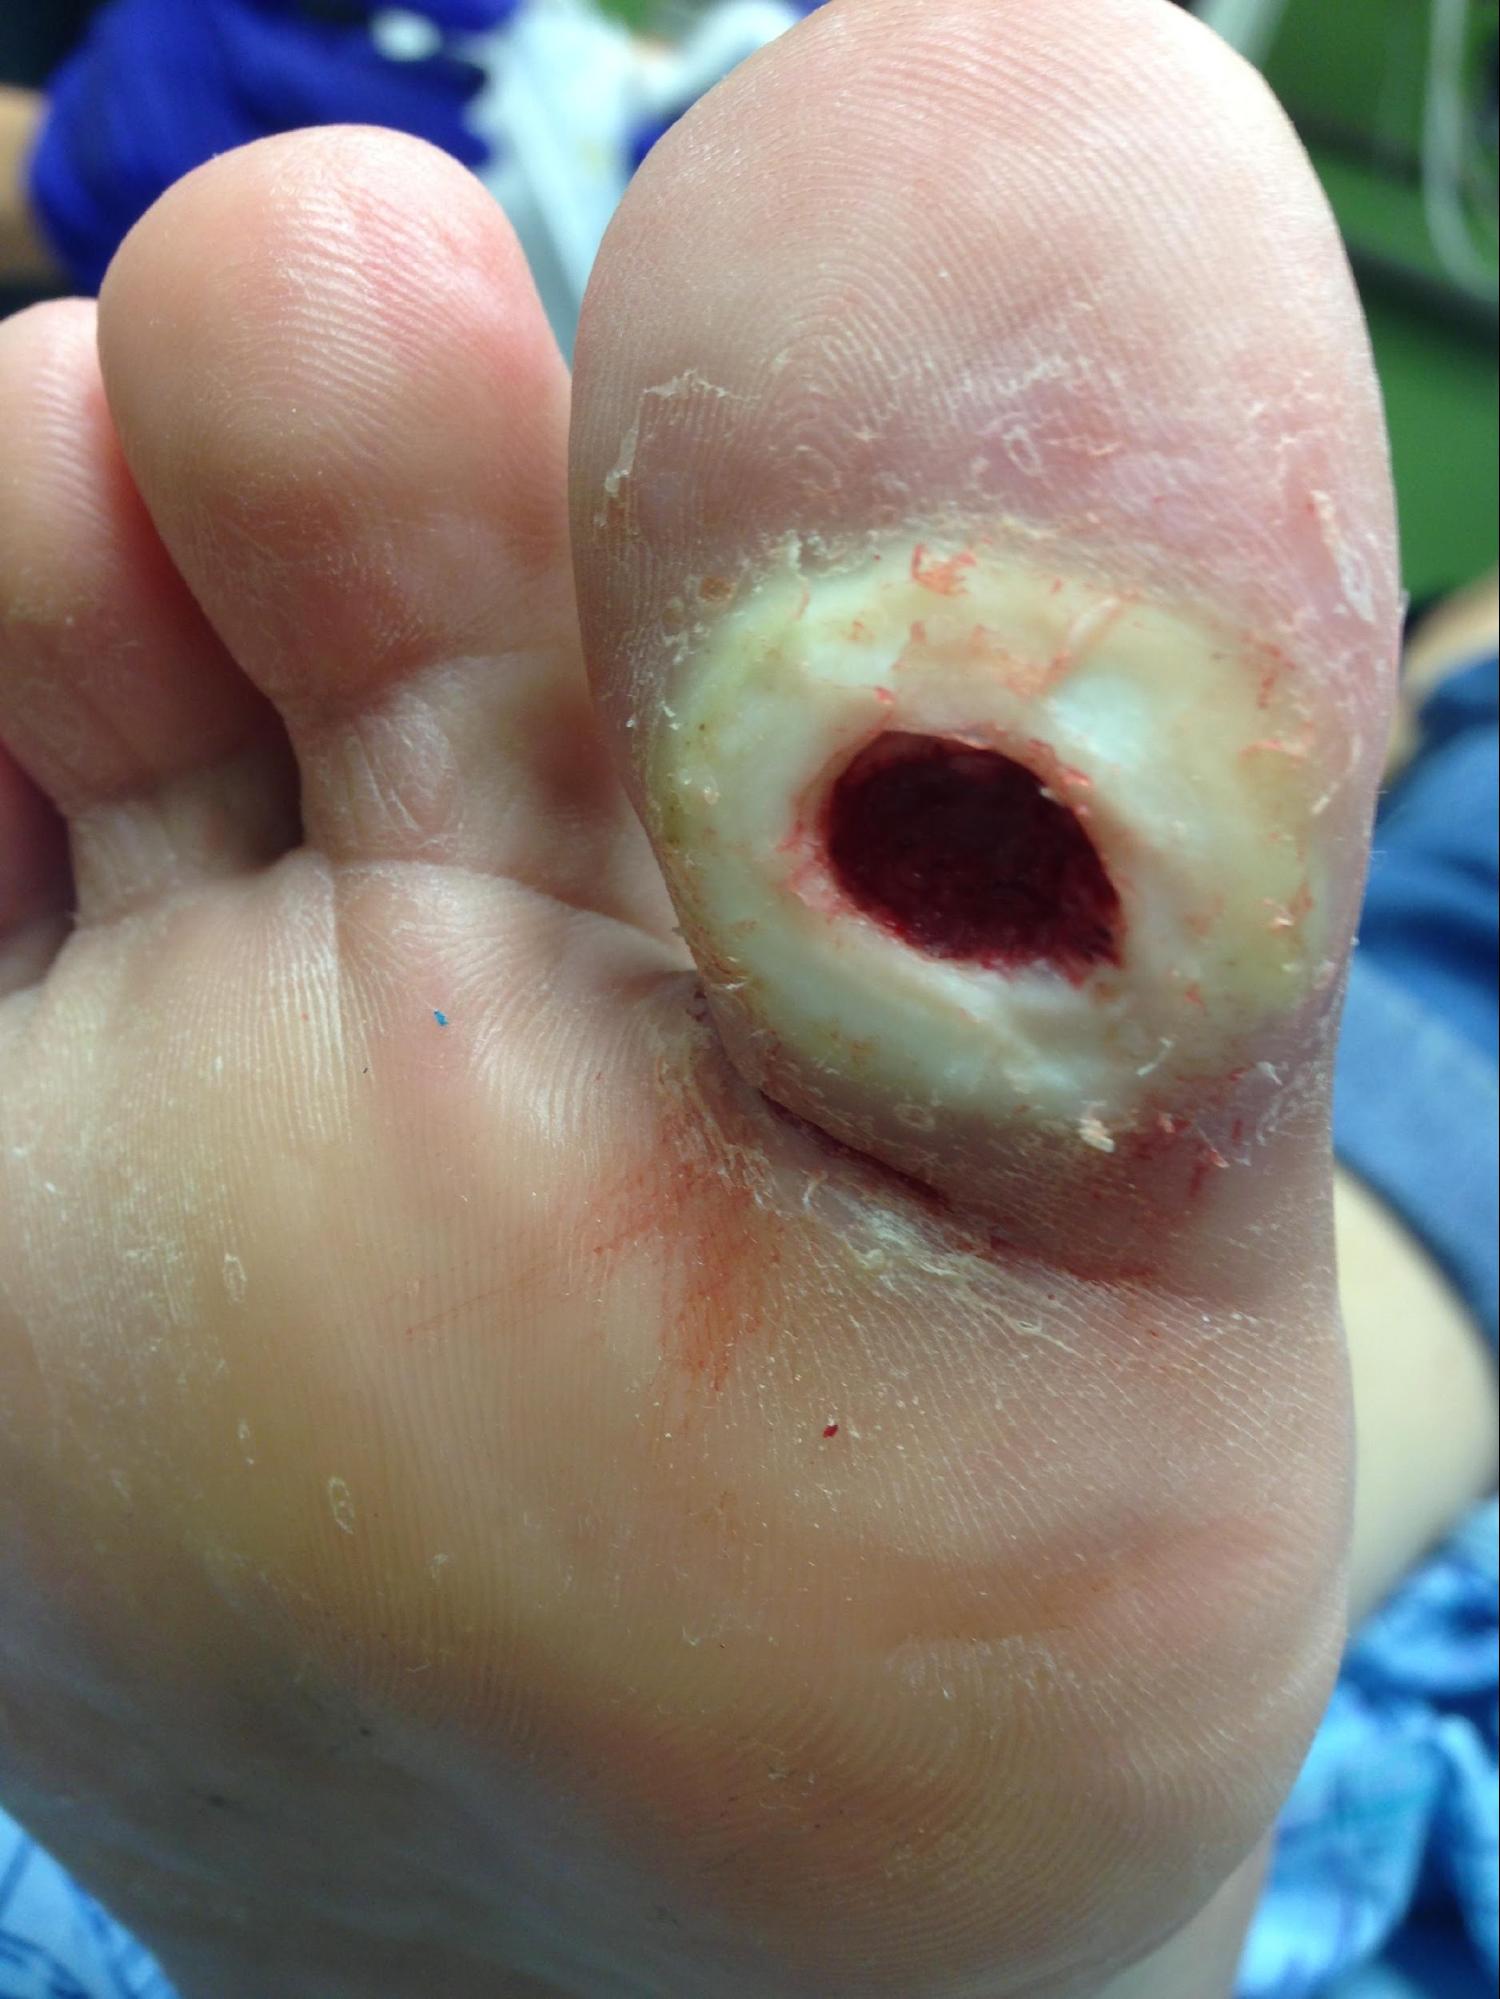 Diabetic Foot Ulcer
Neuropathic ulceration in a patient with diabetes
Note periwound callous formation. Wagner Grade 2